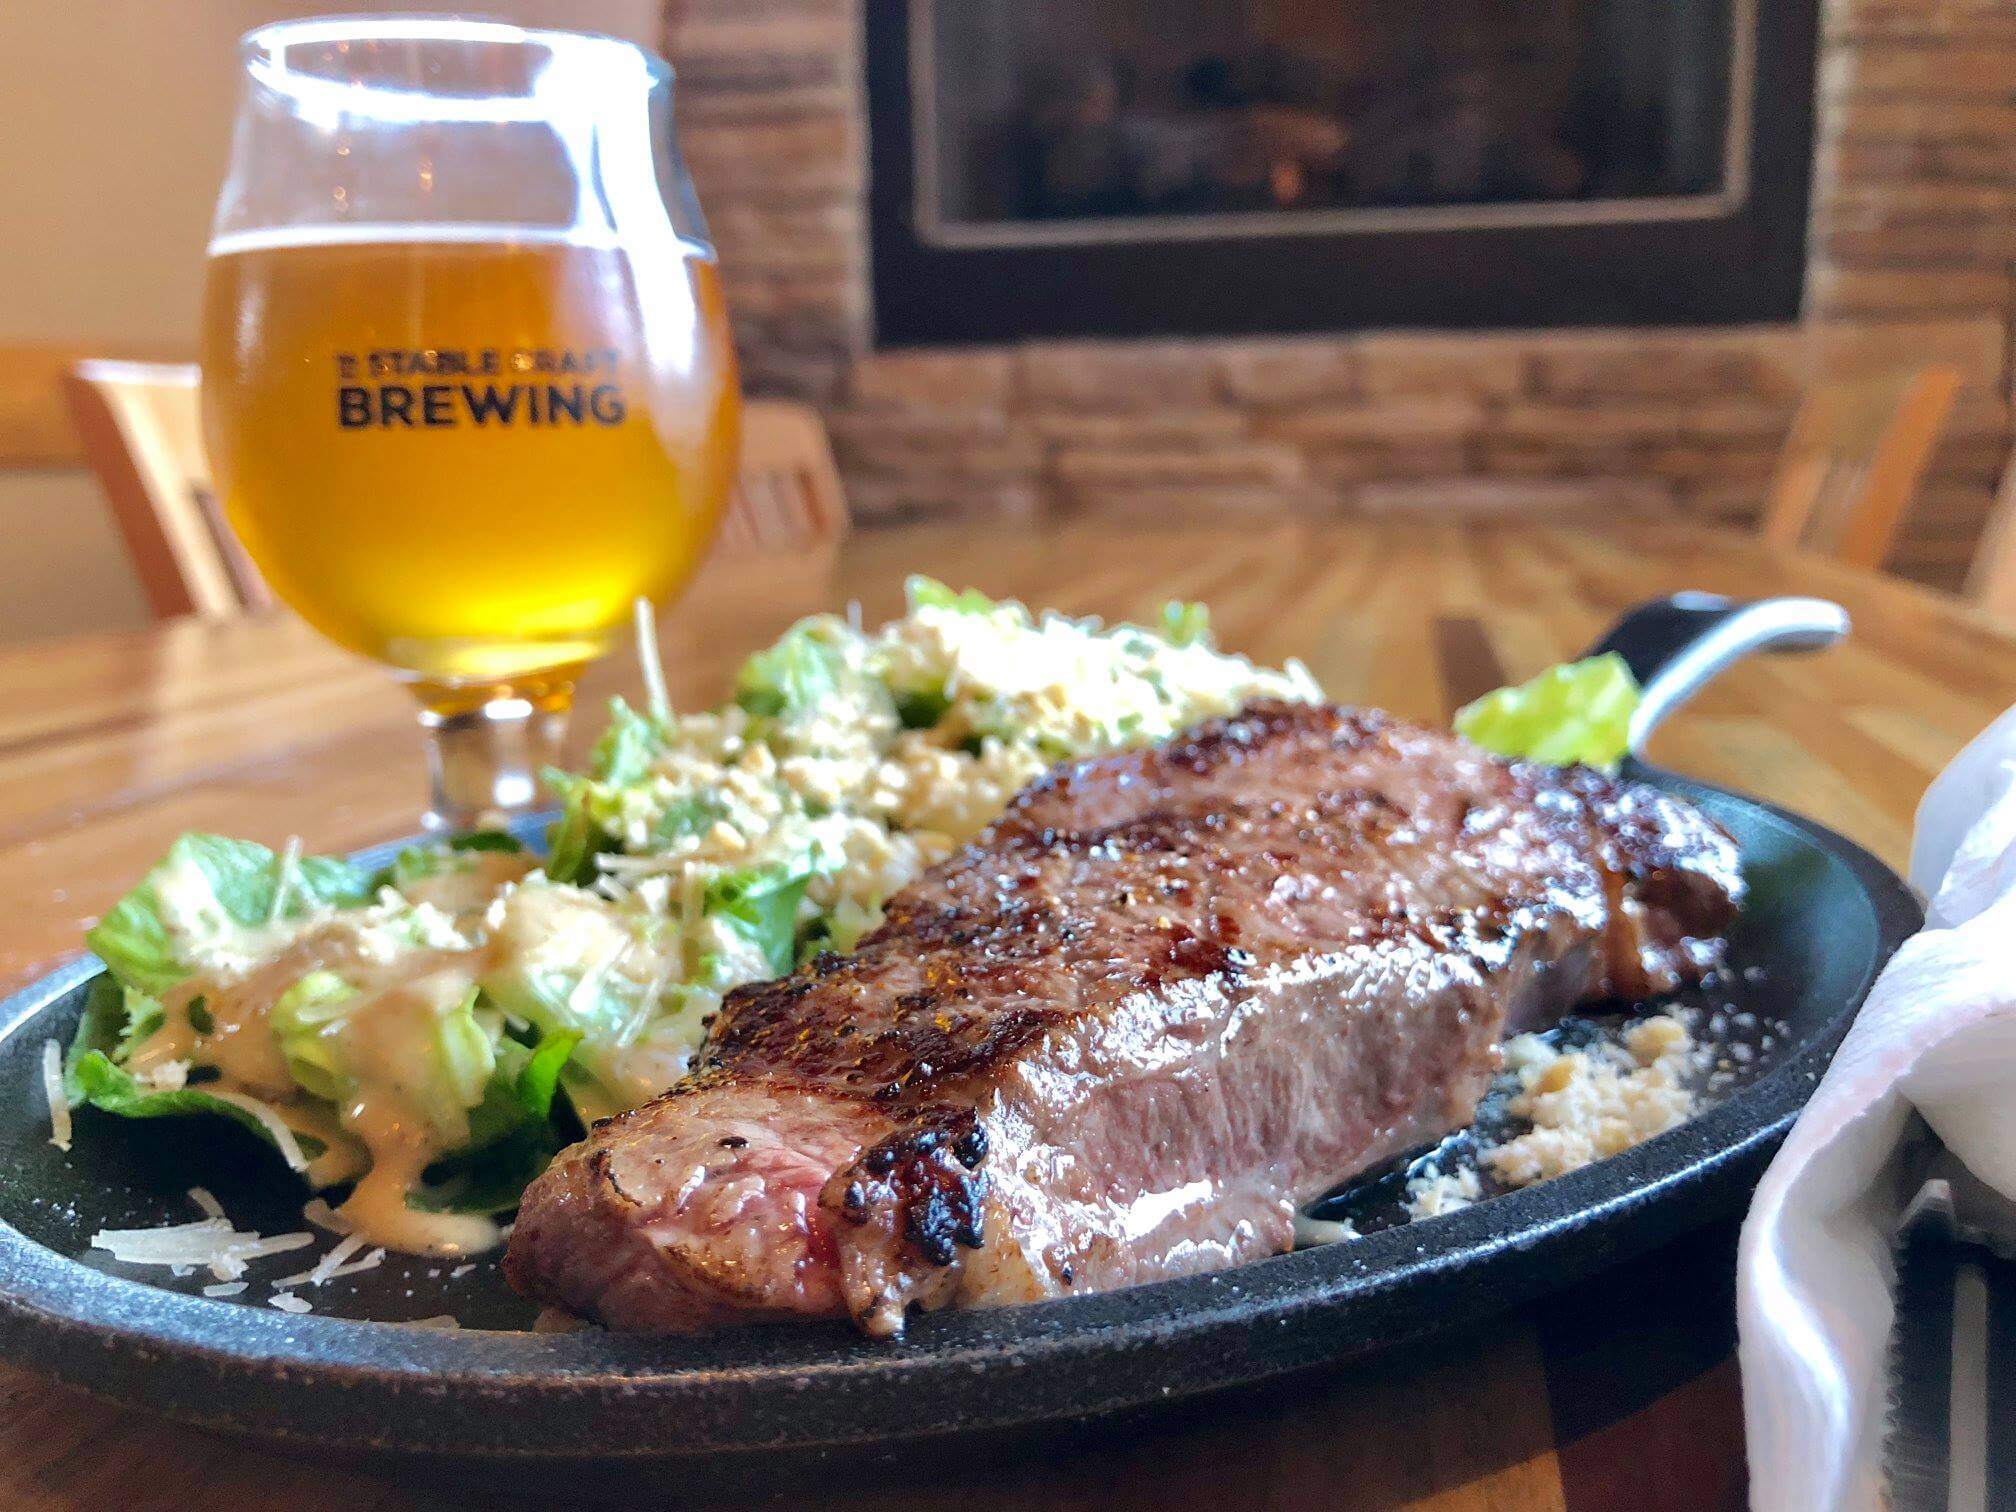 A Guide to Eating at a Beerwerks Brewery